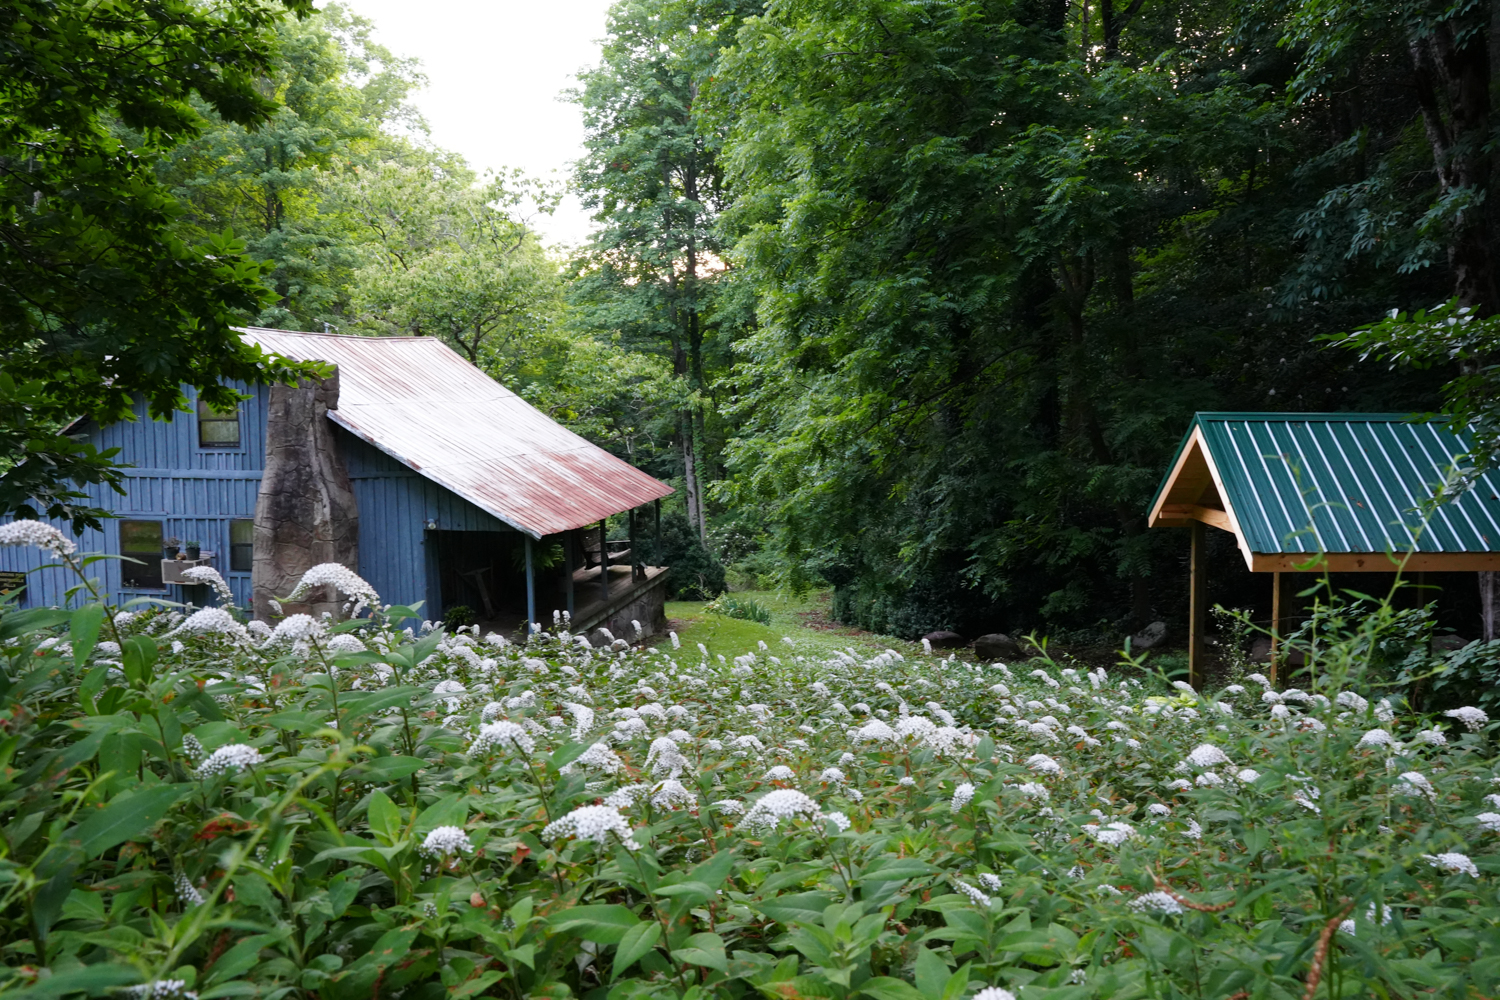 Appalachian style home behind white gooseneck flowers and a pavilion with a green roof